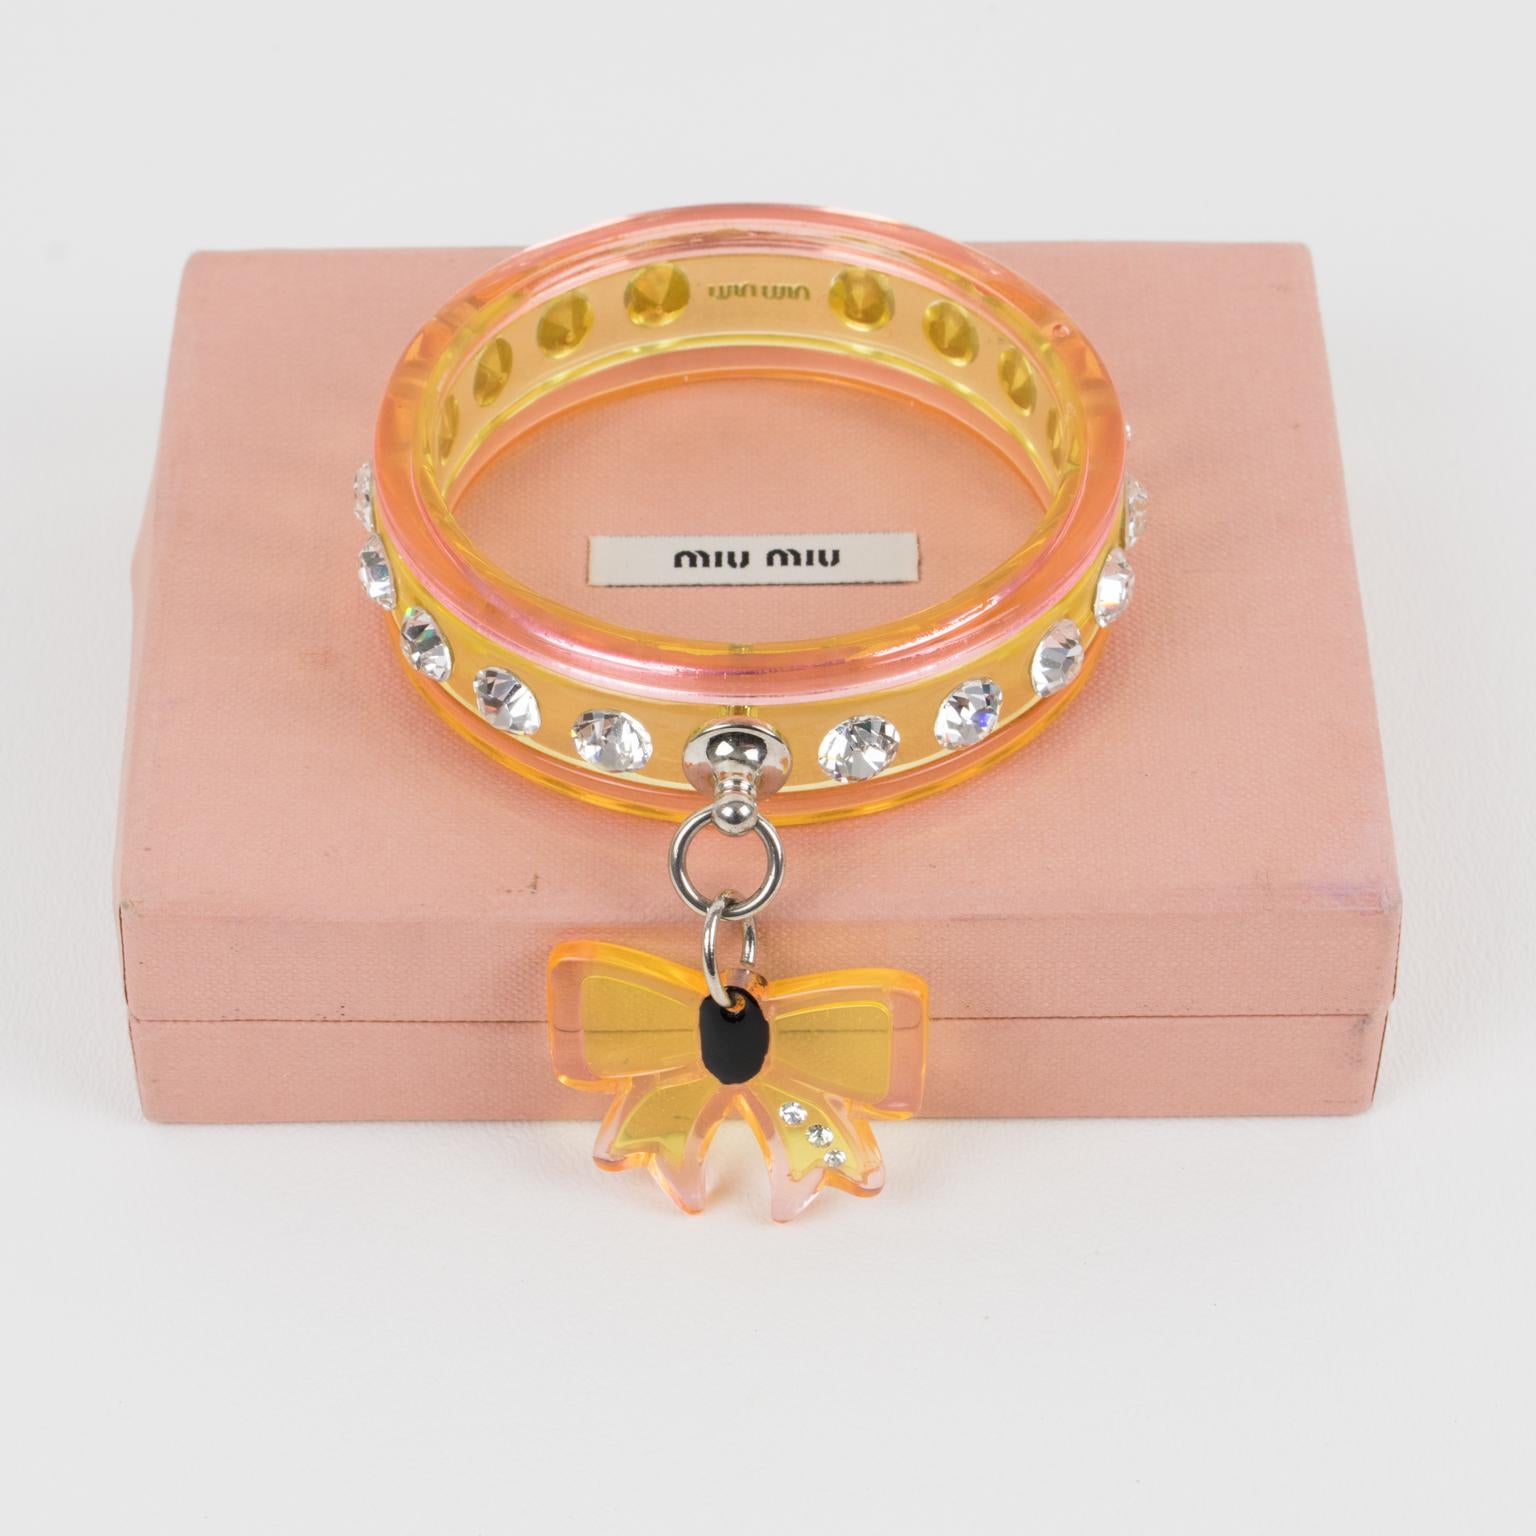 So cute Miu Miu acrylic bracelet bangle. Carved shape in transparent acrylic or Lucite with crystal rhinestones all around. Compliment with bow charm on the side in same color and material. Assorted colors of powder pink and light yellow. Chromed